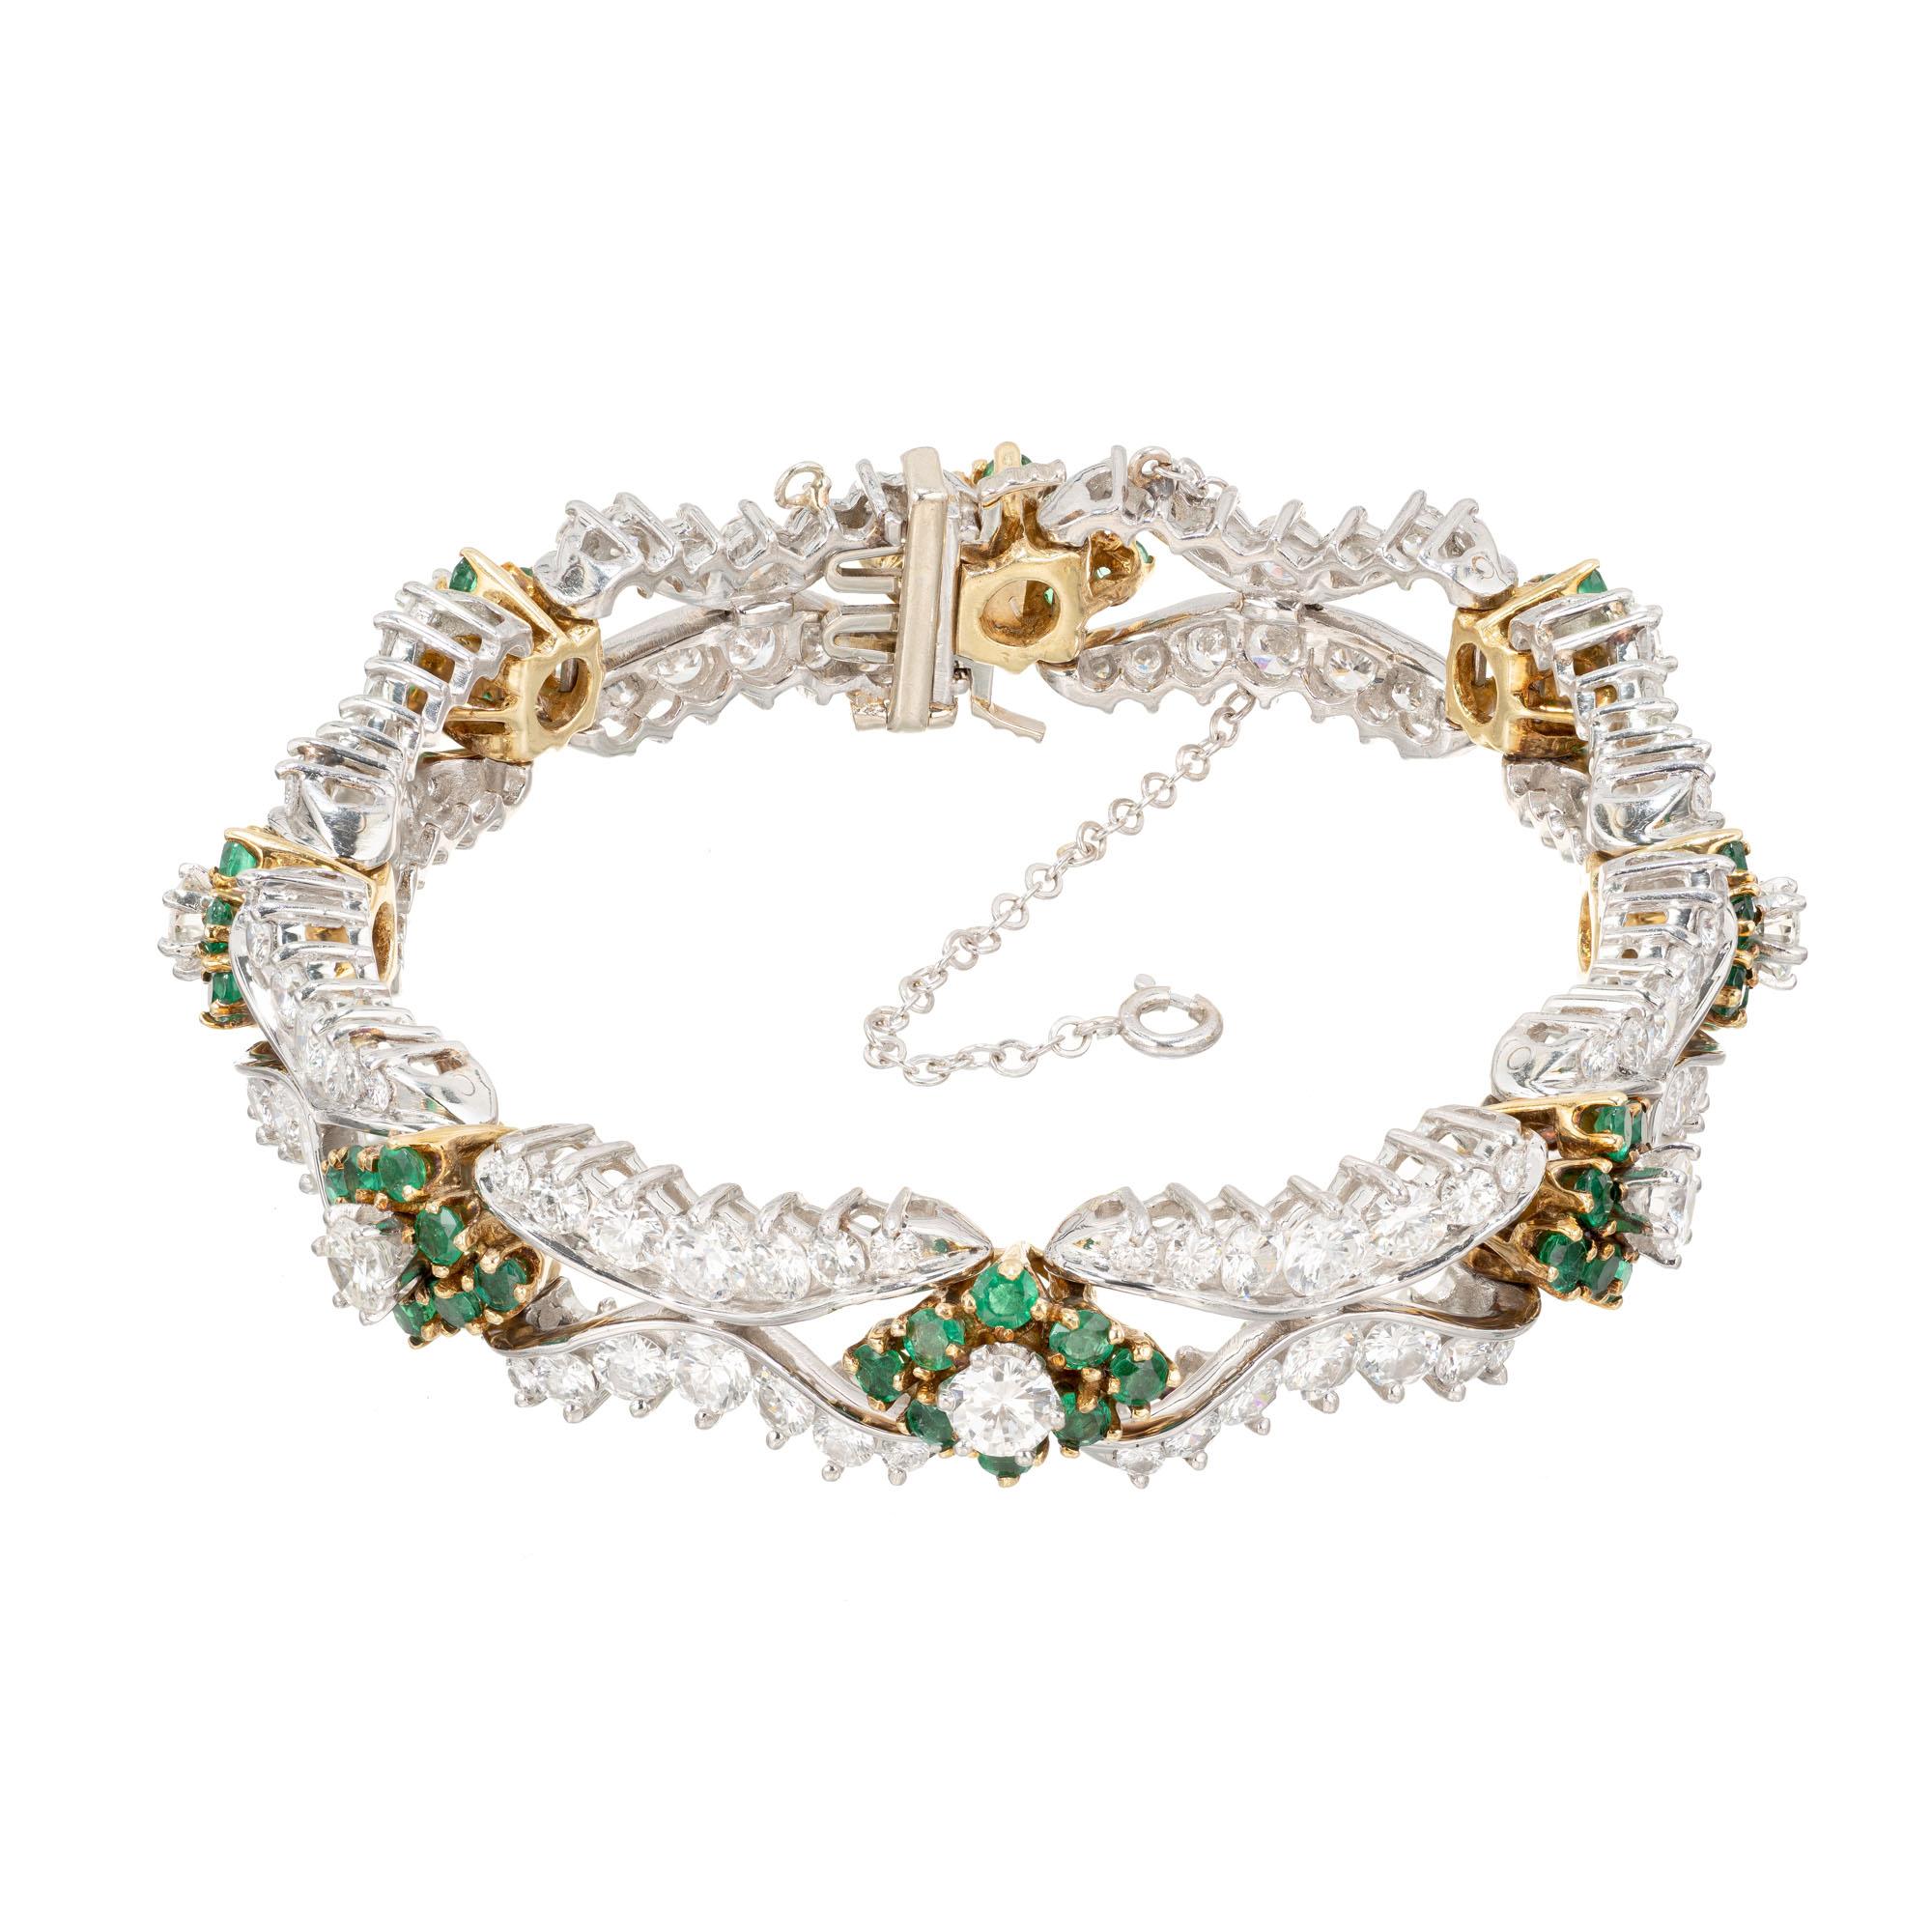 Emerald and diamond hinged link bracelet with built in catch, underside safety catch and chain. Circa 1950's. 14k White and yellow gold. 

8 full cut diamonds, approx. total weight 2.00cts, F, VS
112 full cut diamonds, .03ct to .16ct each, approx.